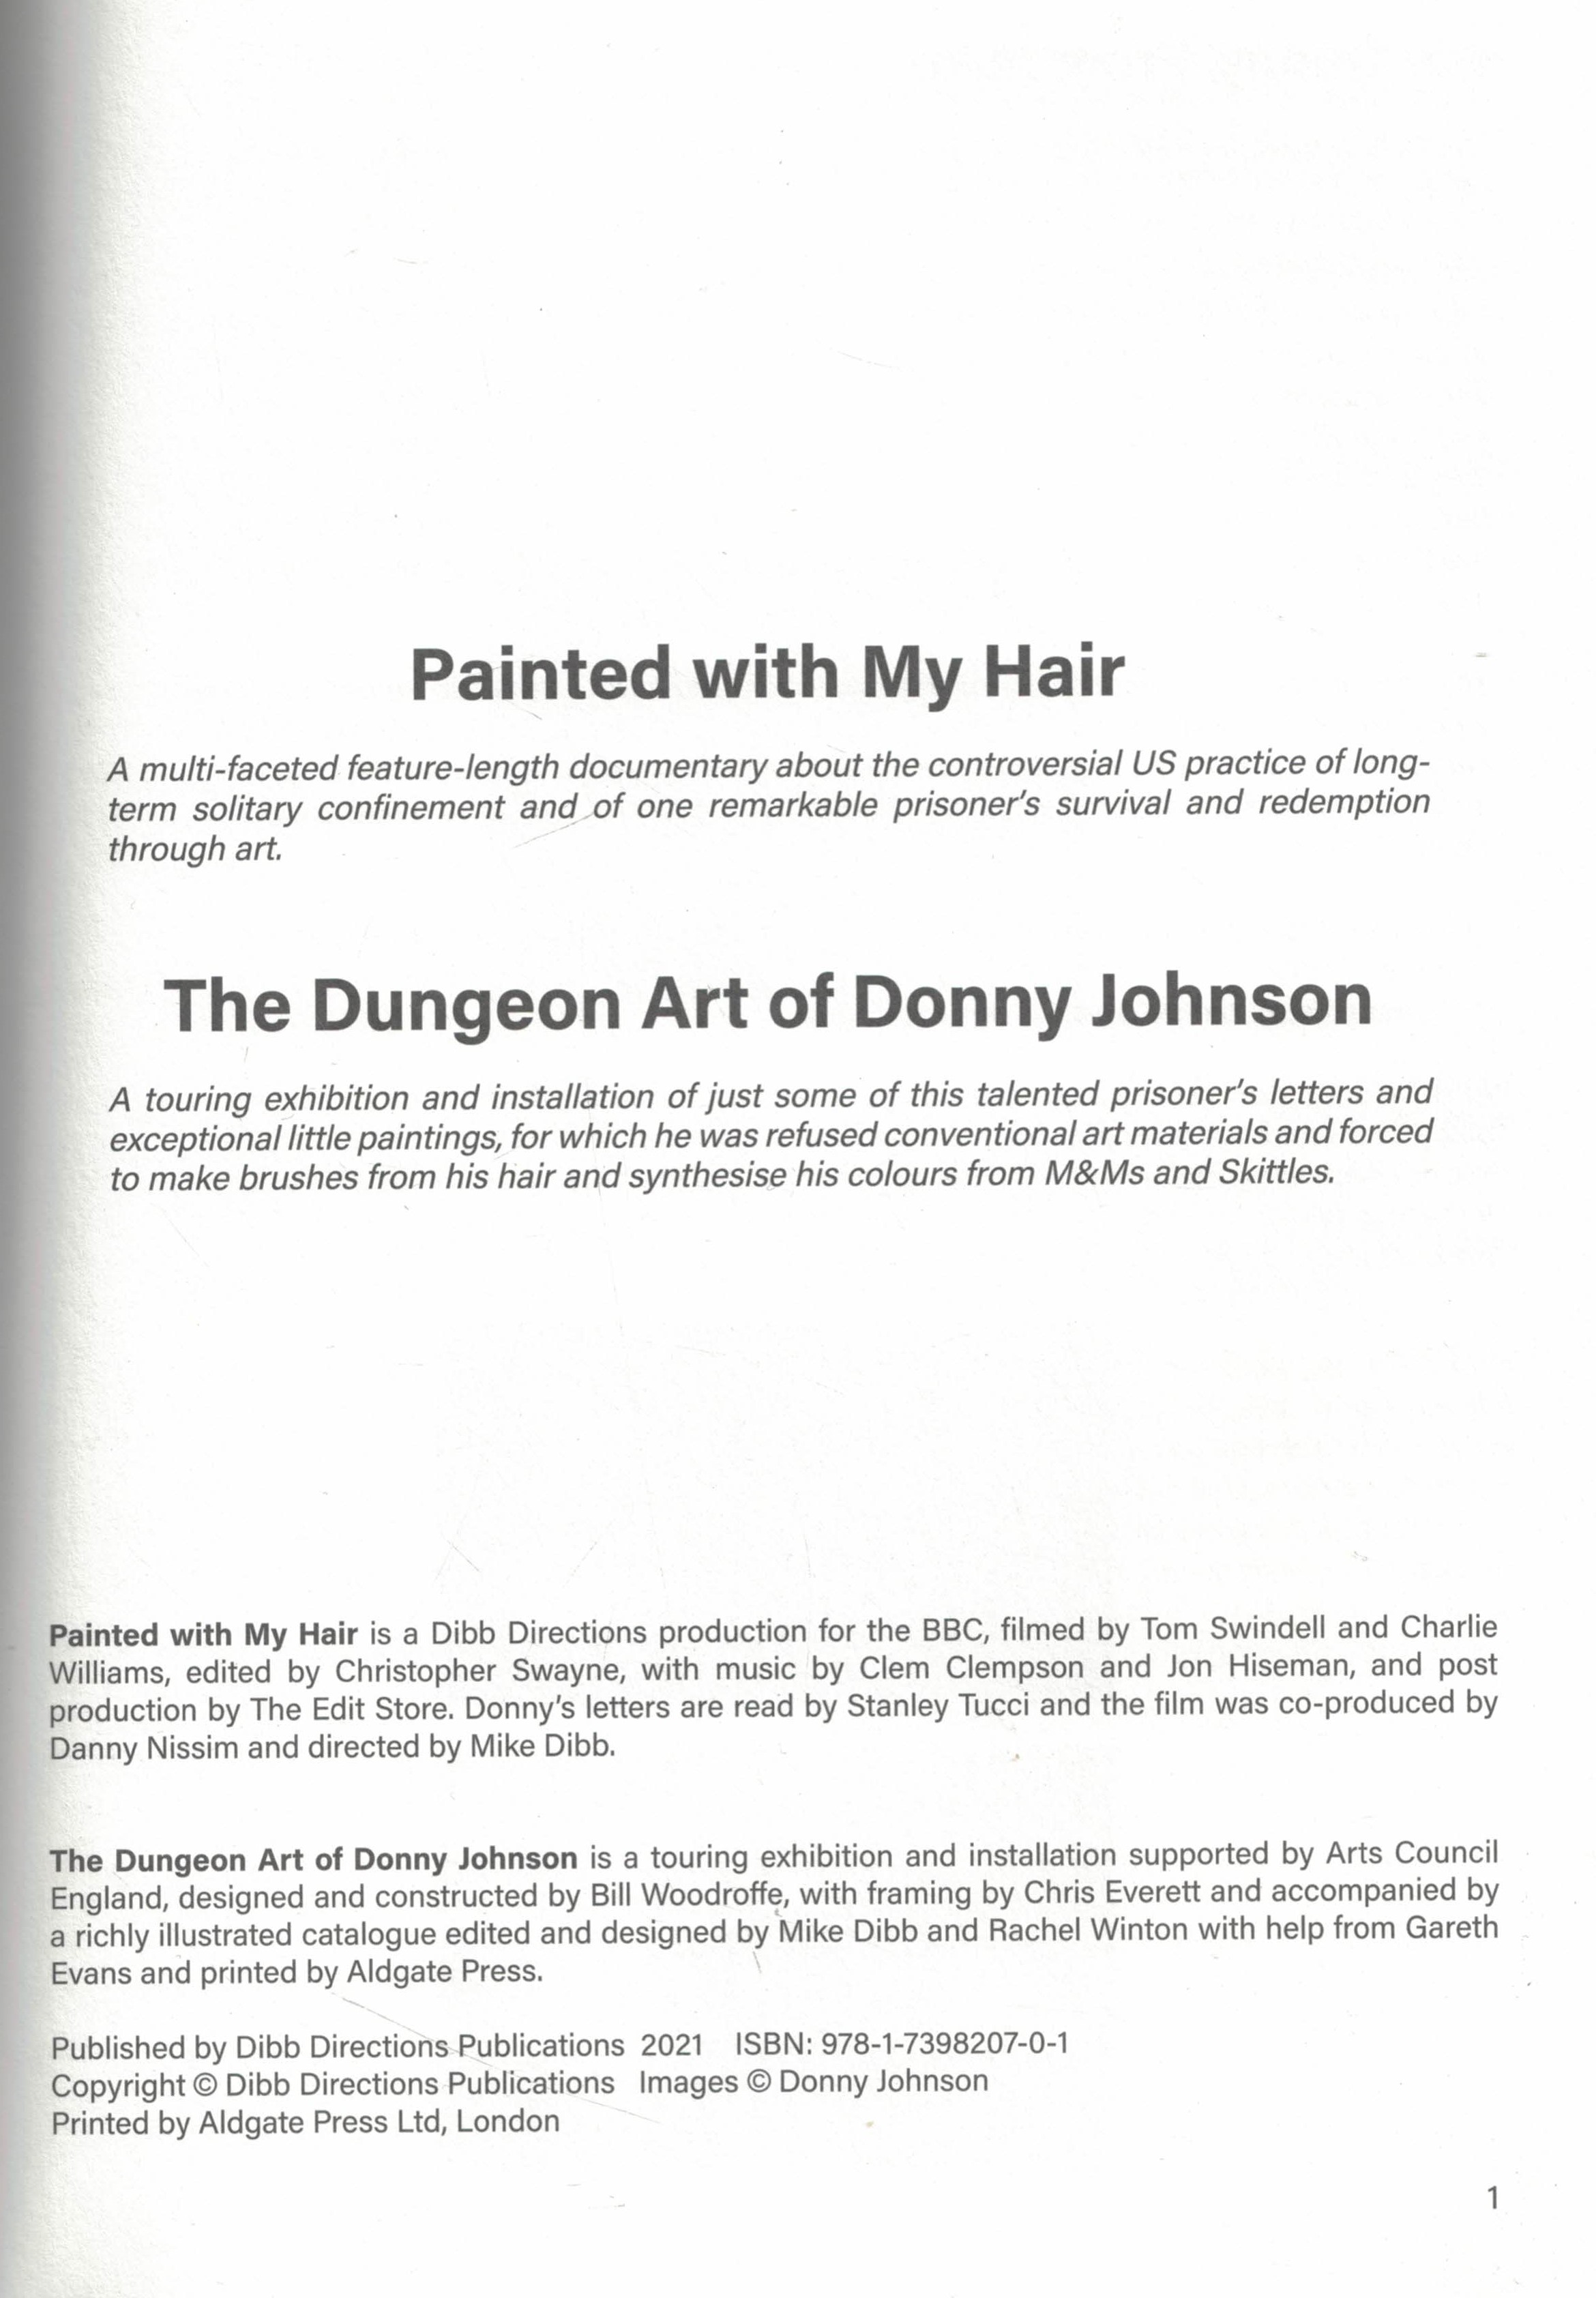 Painted with My Hair. The Dungeon Art of Donny Johnson.